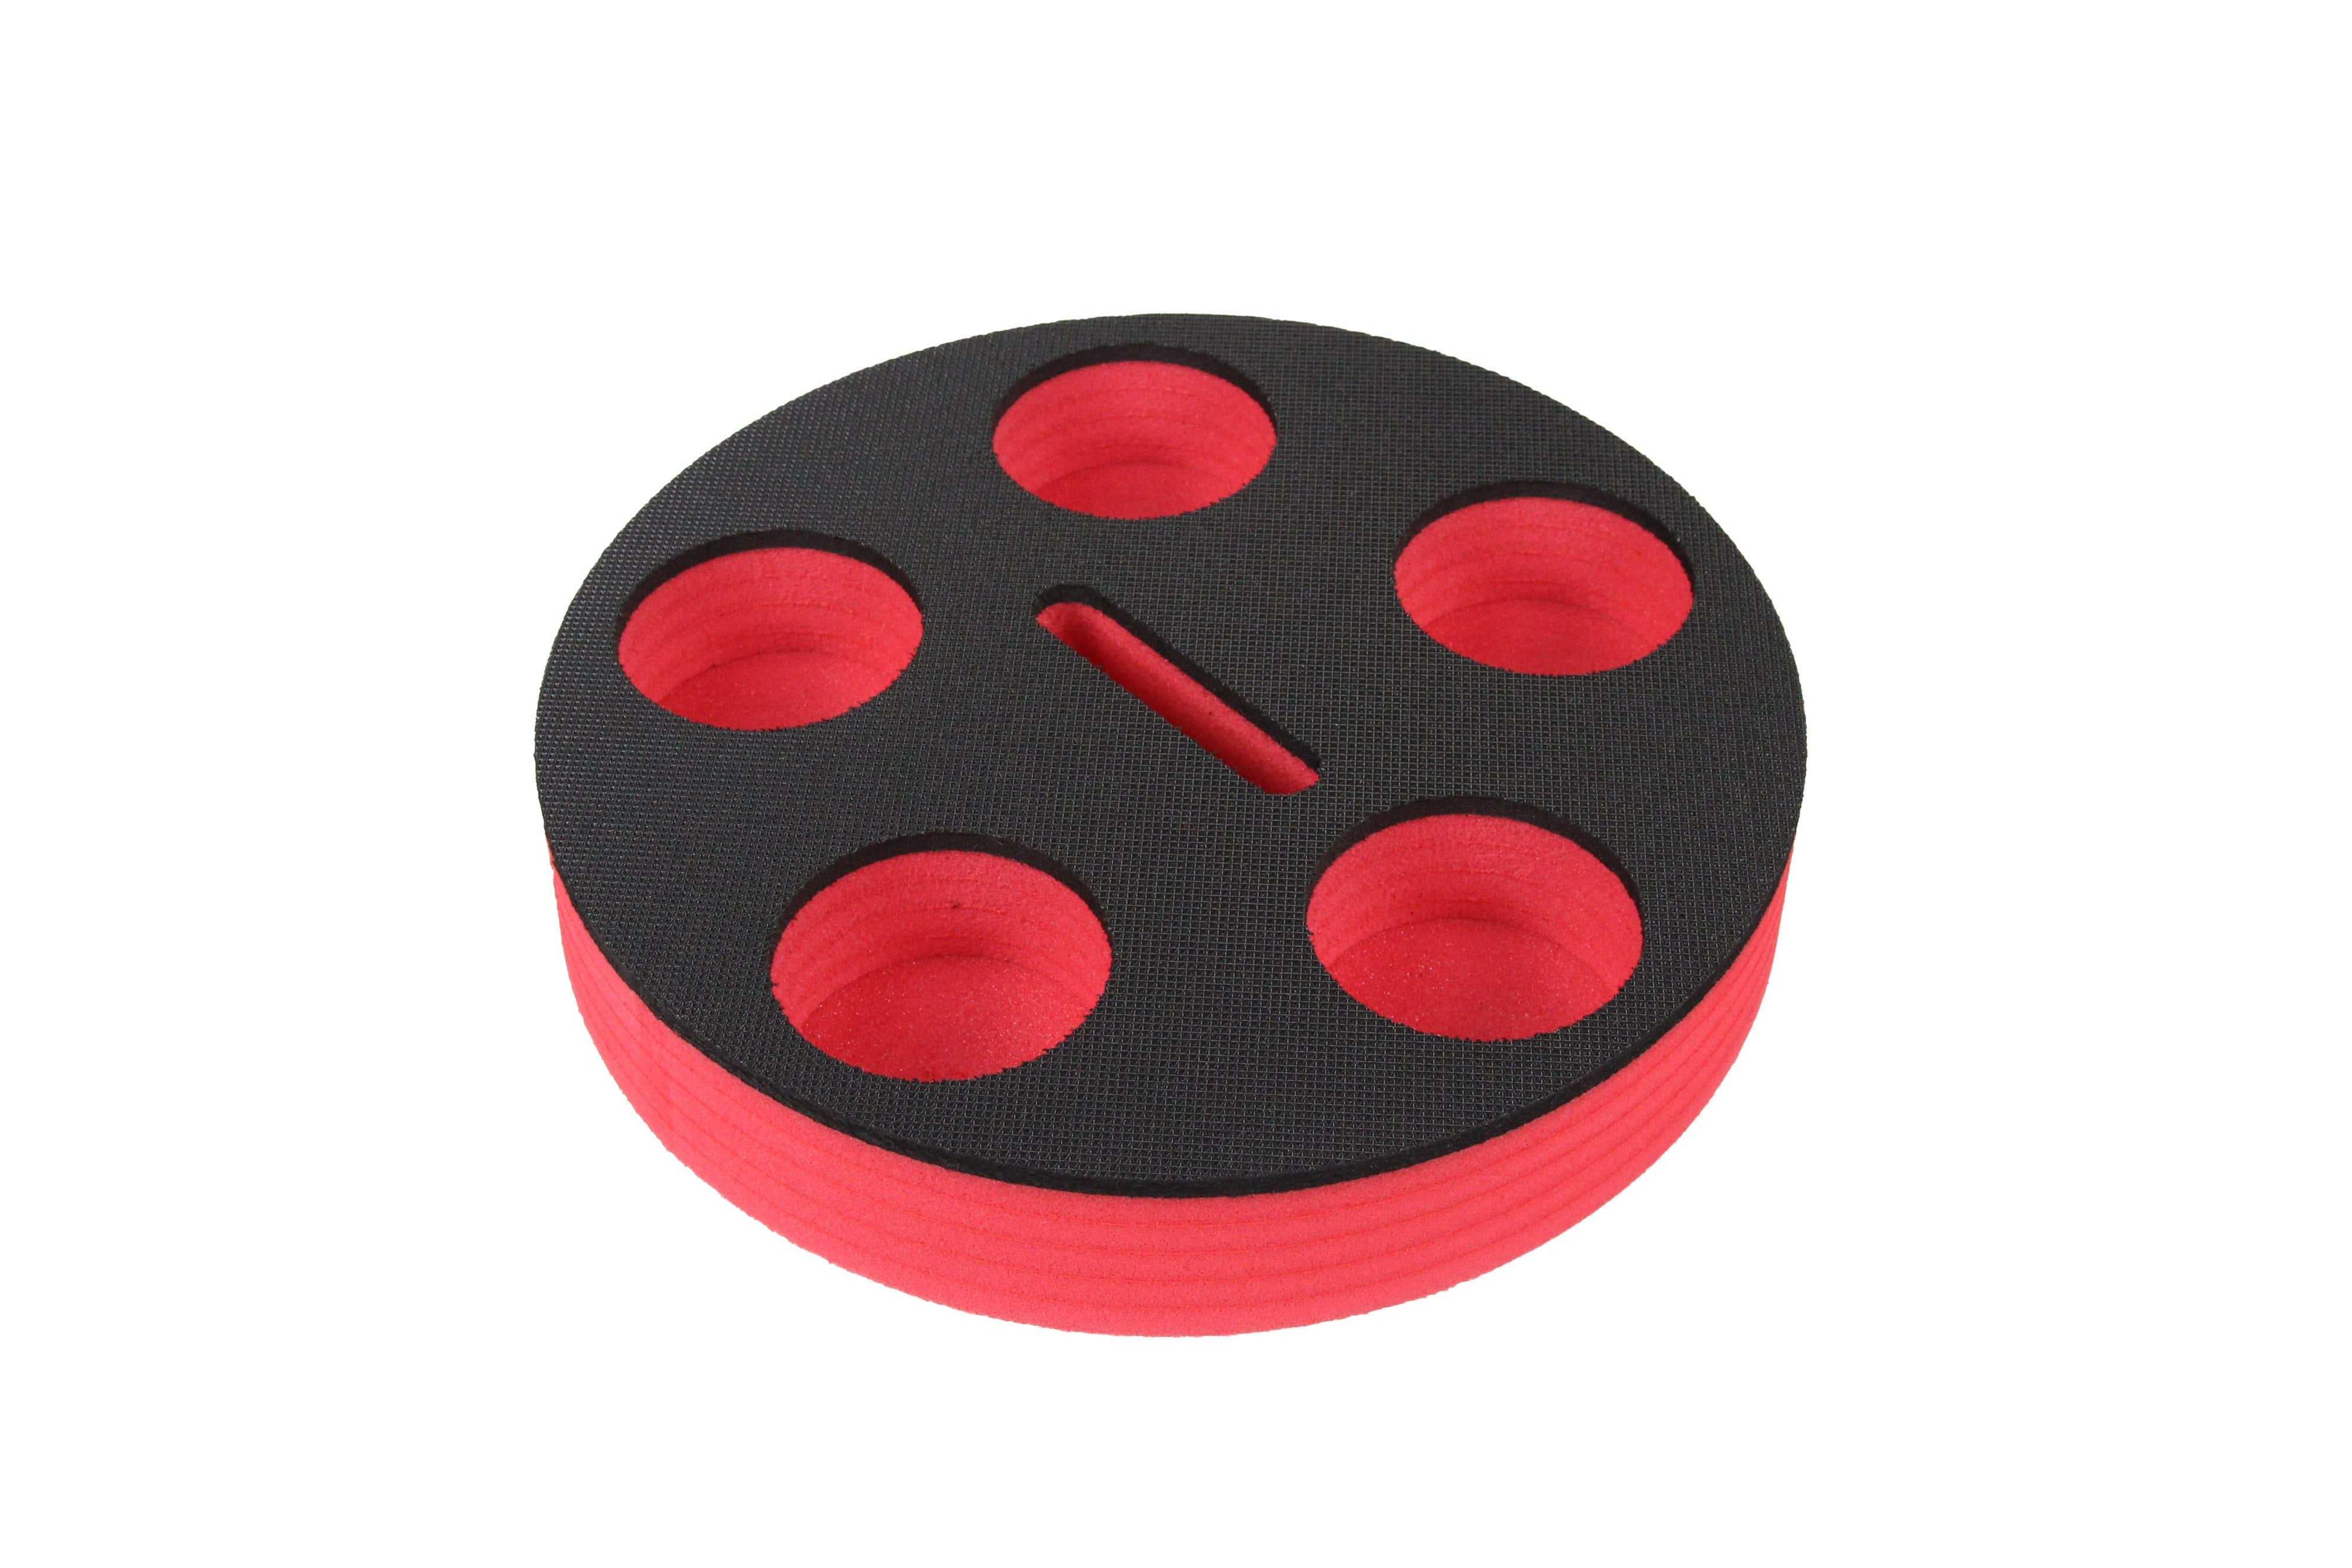 Drink Holder Floating Red Refreshment Tray for Pool or Beach Party Float Lounge Durable Foam 6 Compartment UV Resistant 12 Inches Cup Holders